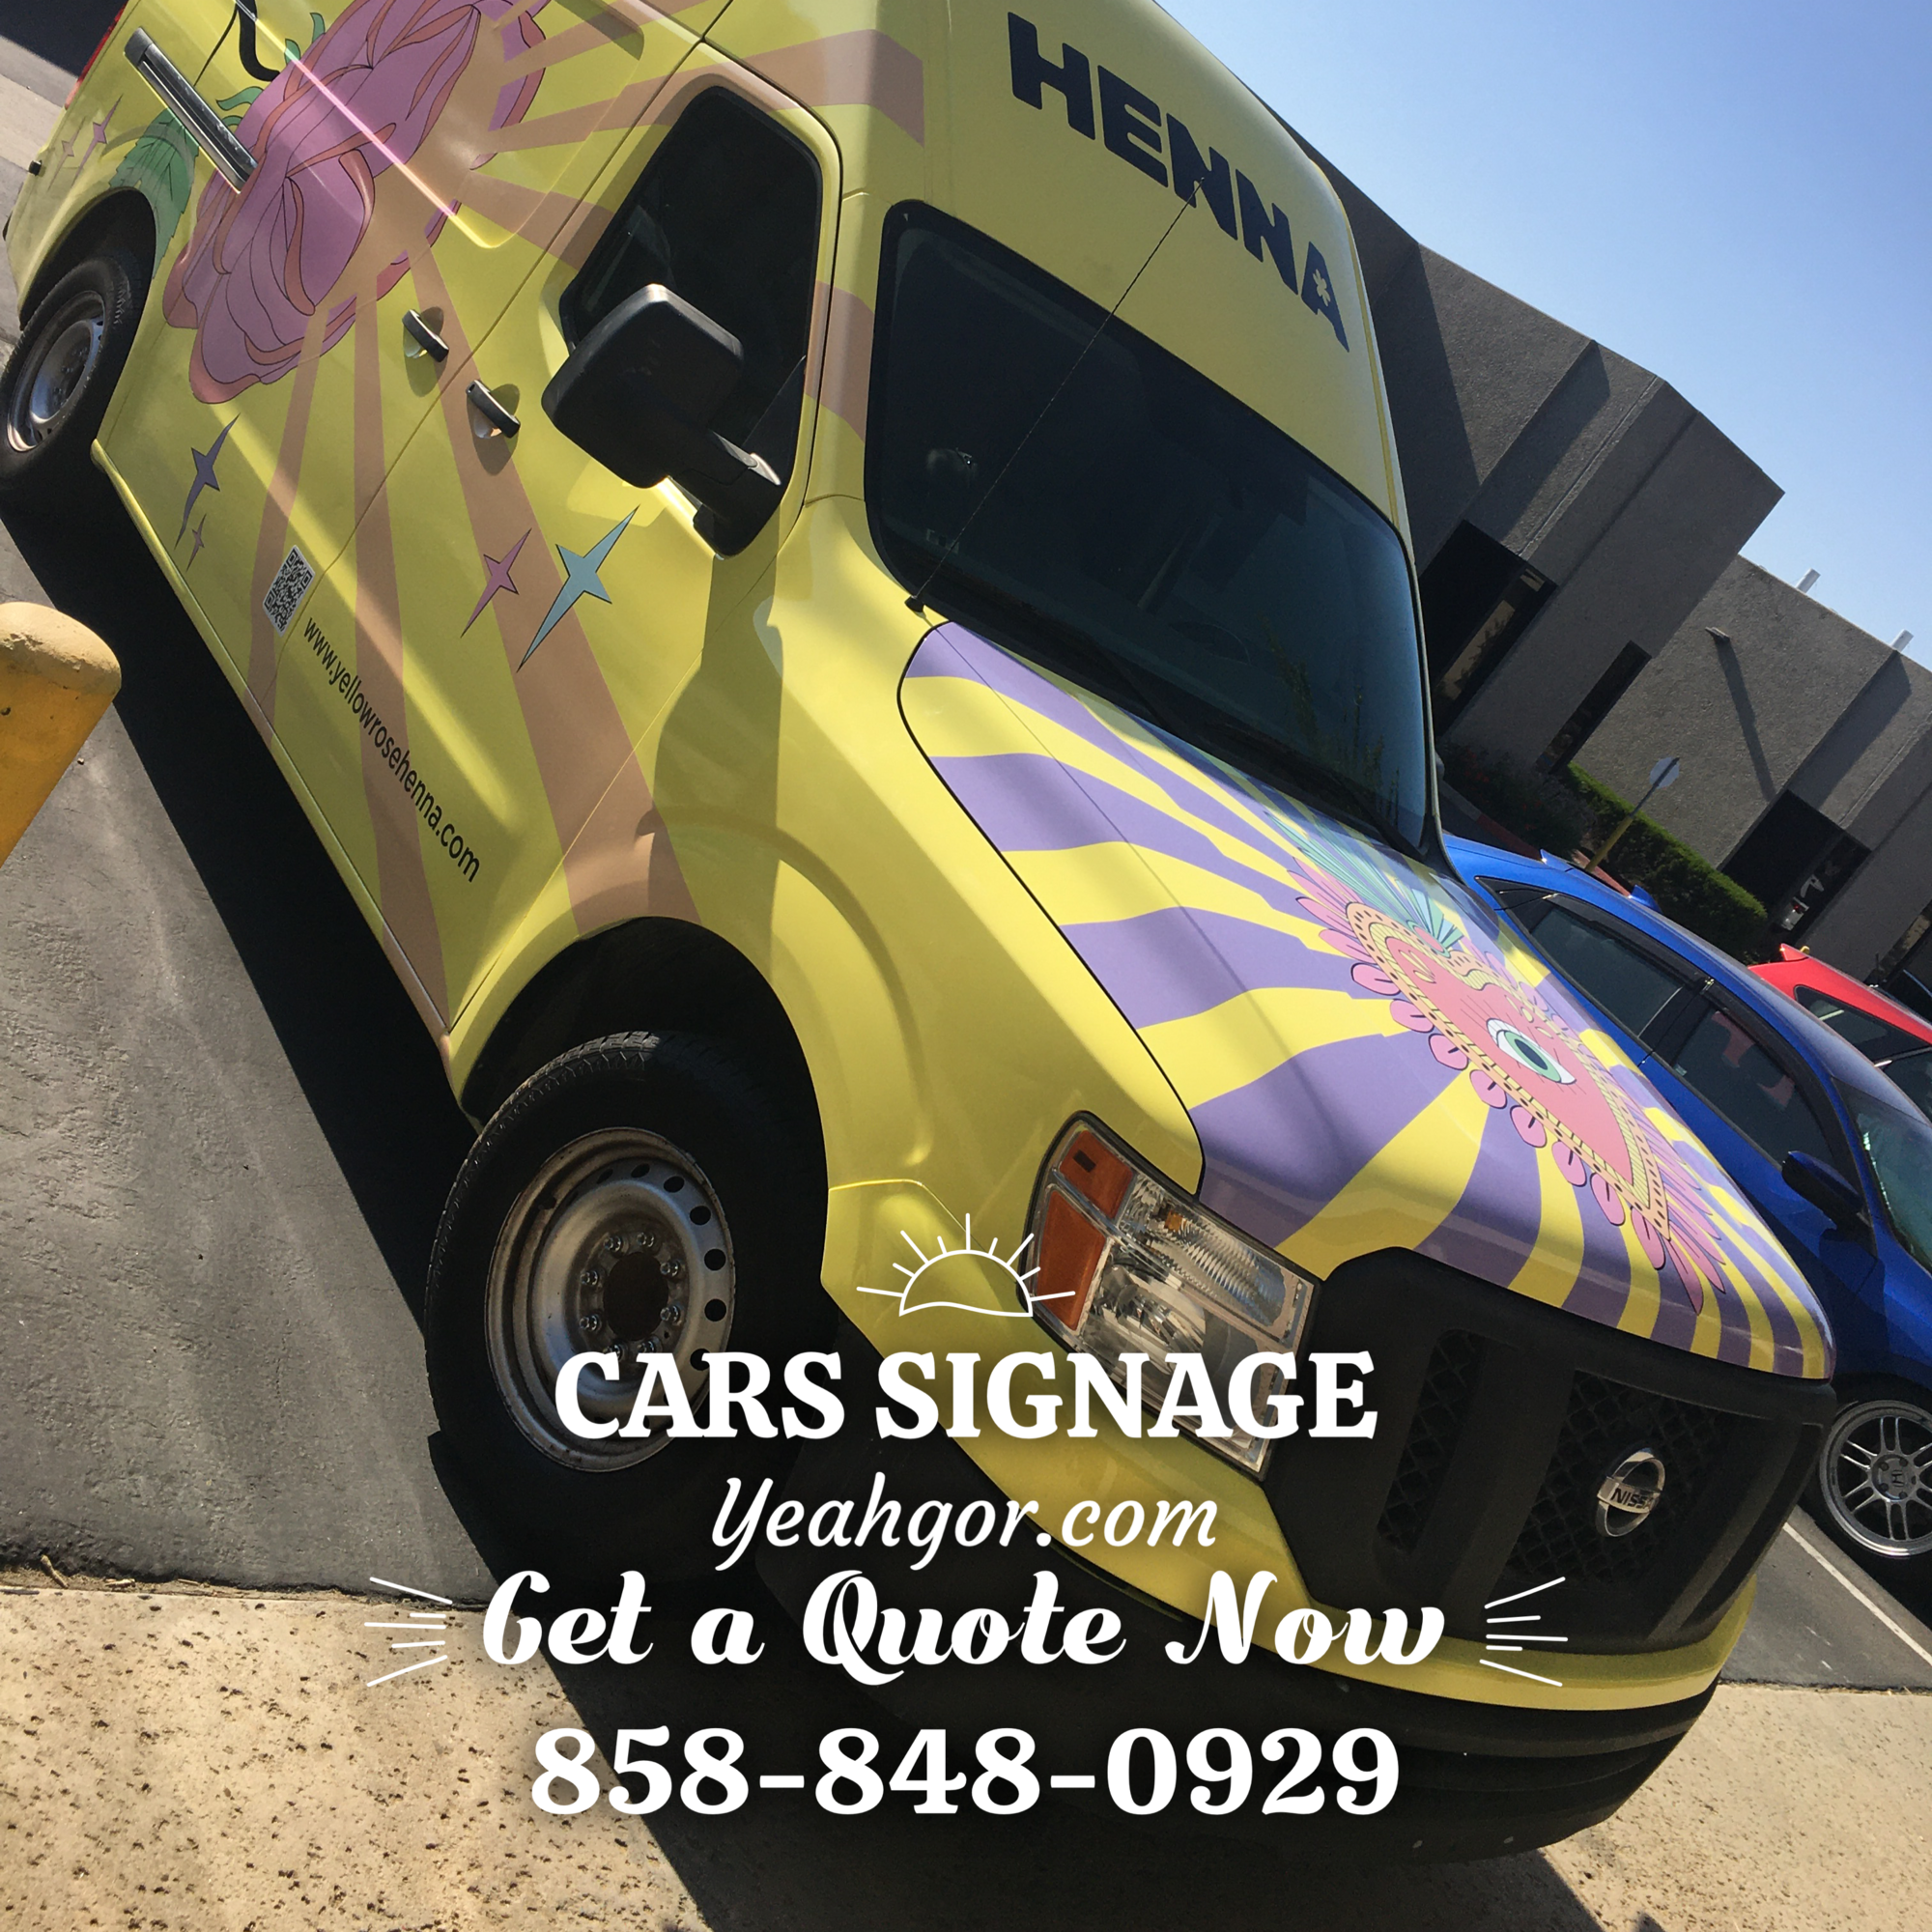 Chula Vista, CA – Cars Signage and Company Logo Vinyl Decals for Small Businesses.